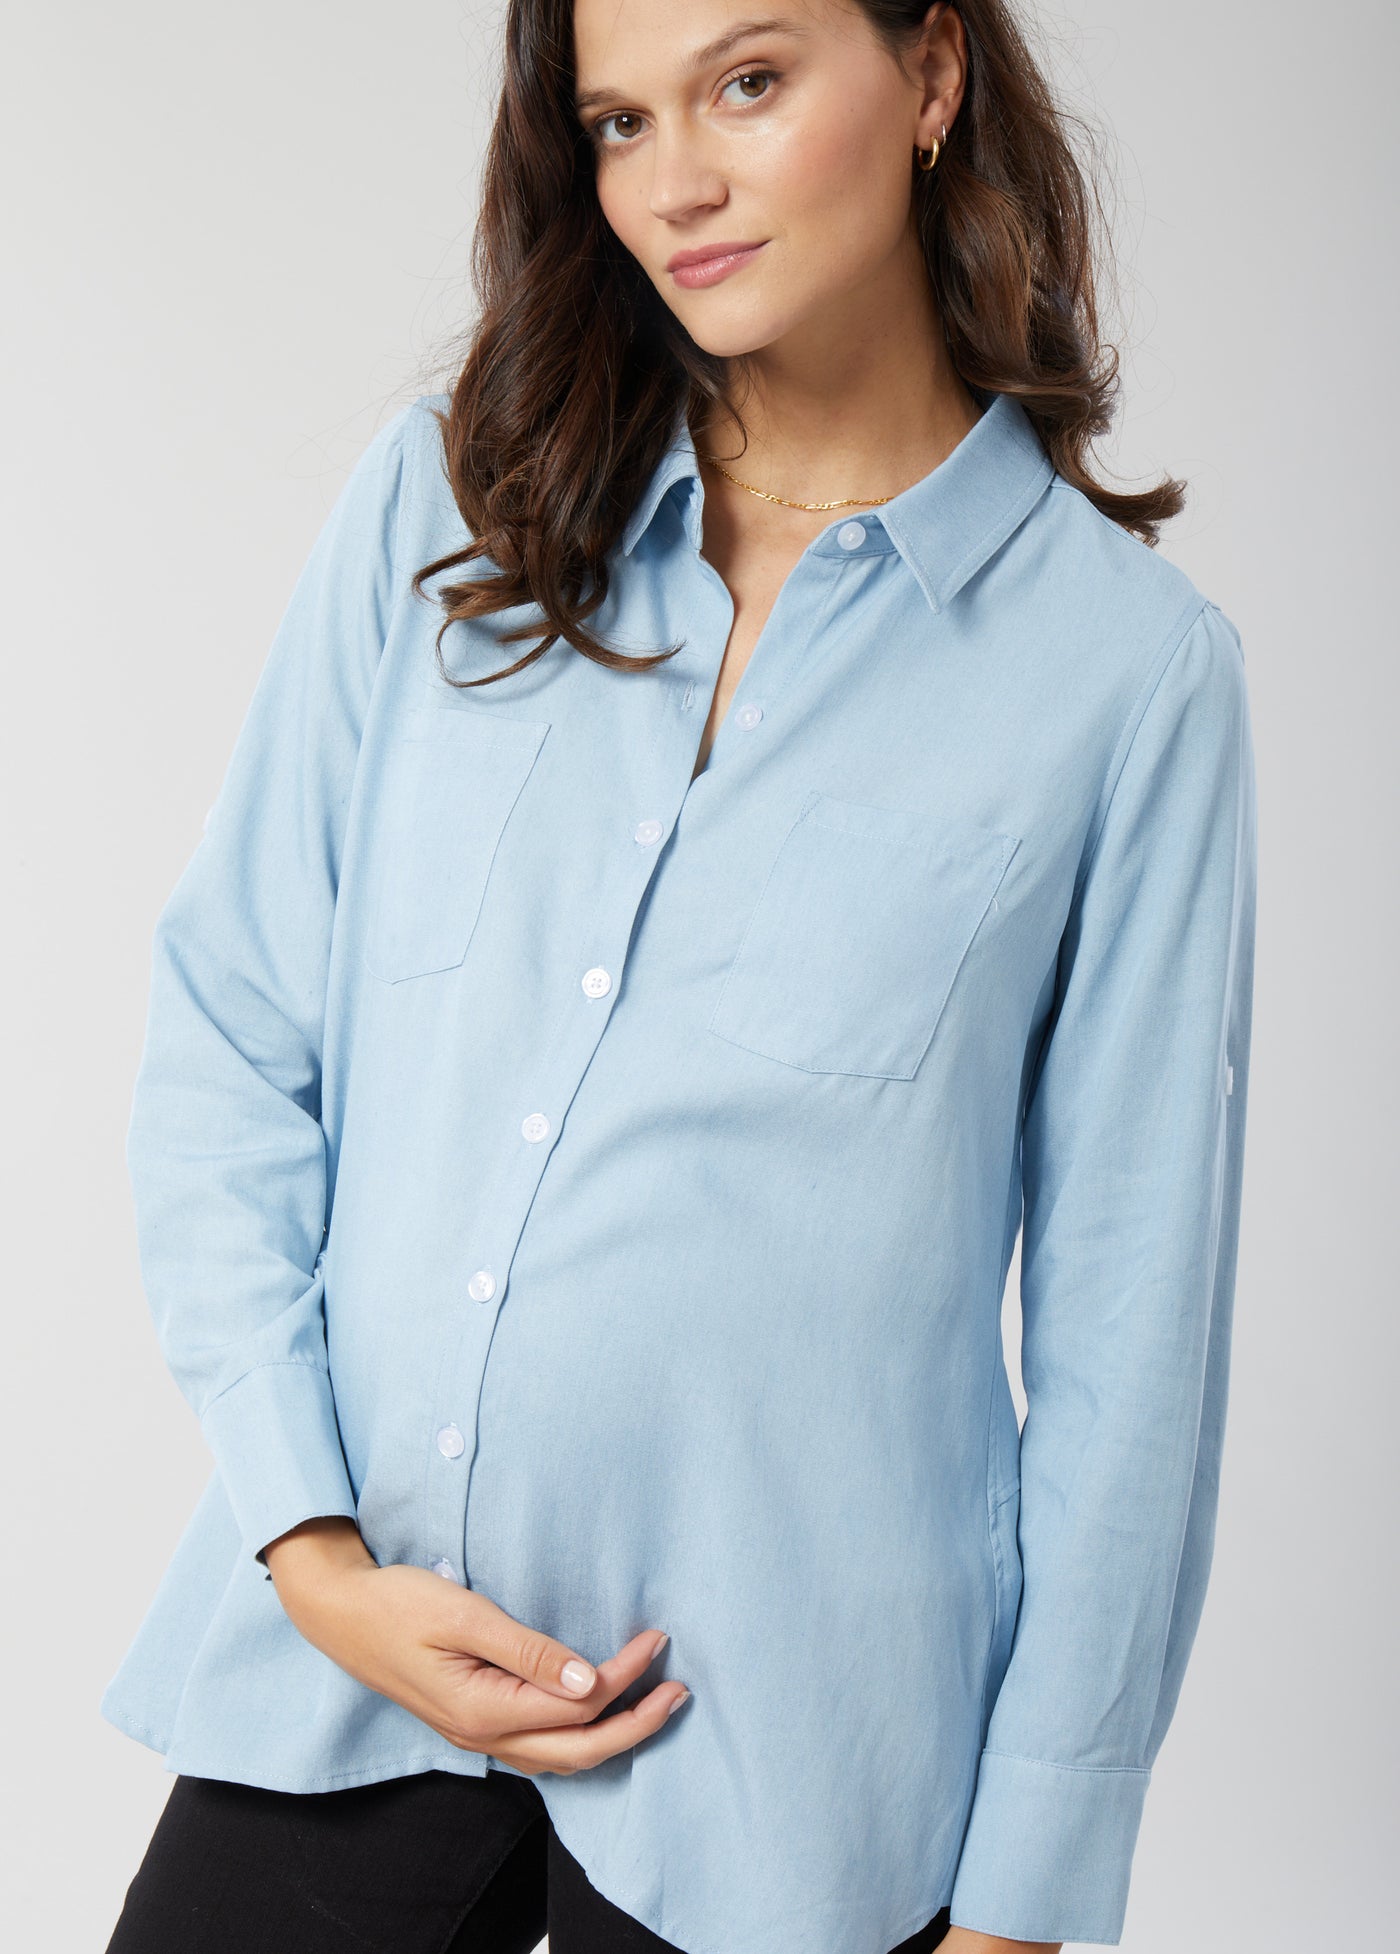 Rachel is 5’10", 28 weeks pregnant, and wearing a size small||Chambray